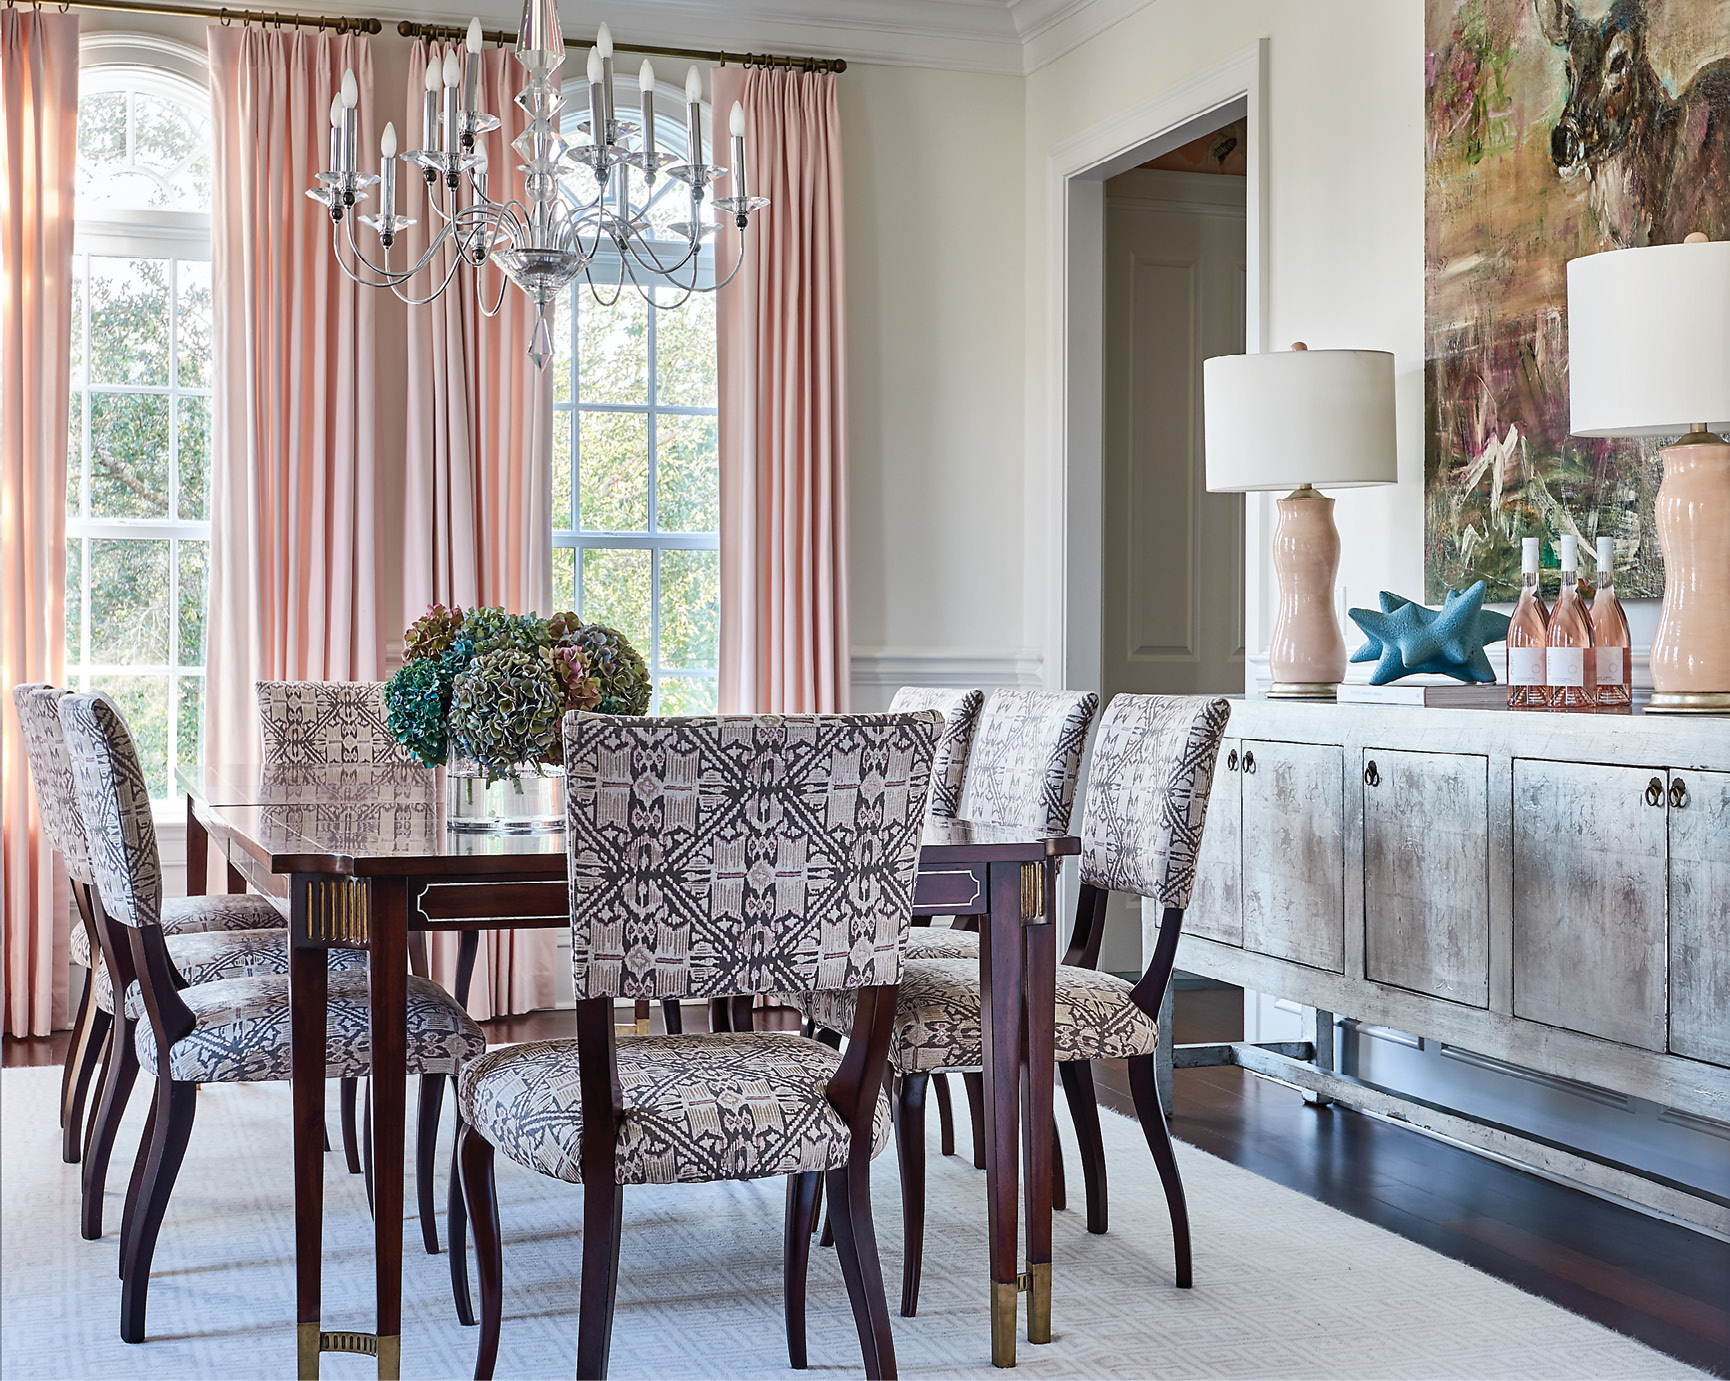 In the dining room, pastel pink drapes from Greenhouse Fabrics continue the light, feminine feel, bringing playful hues to the more formal space.